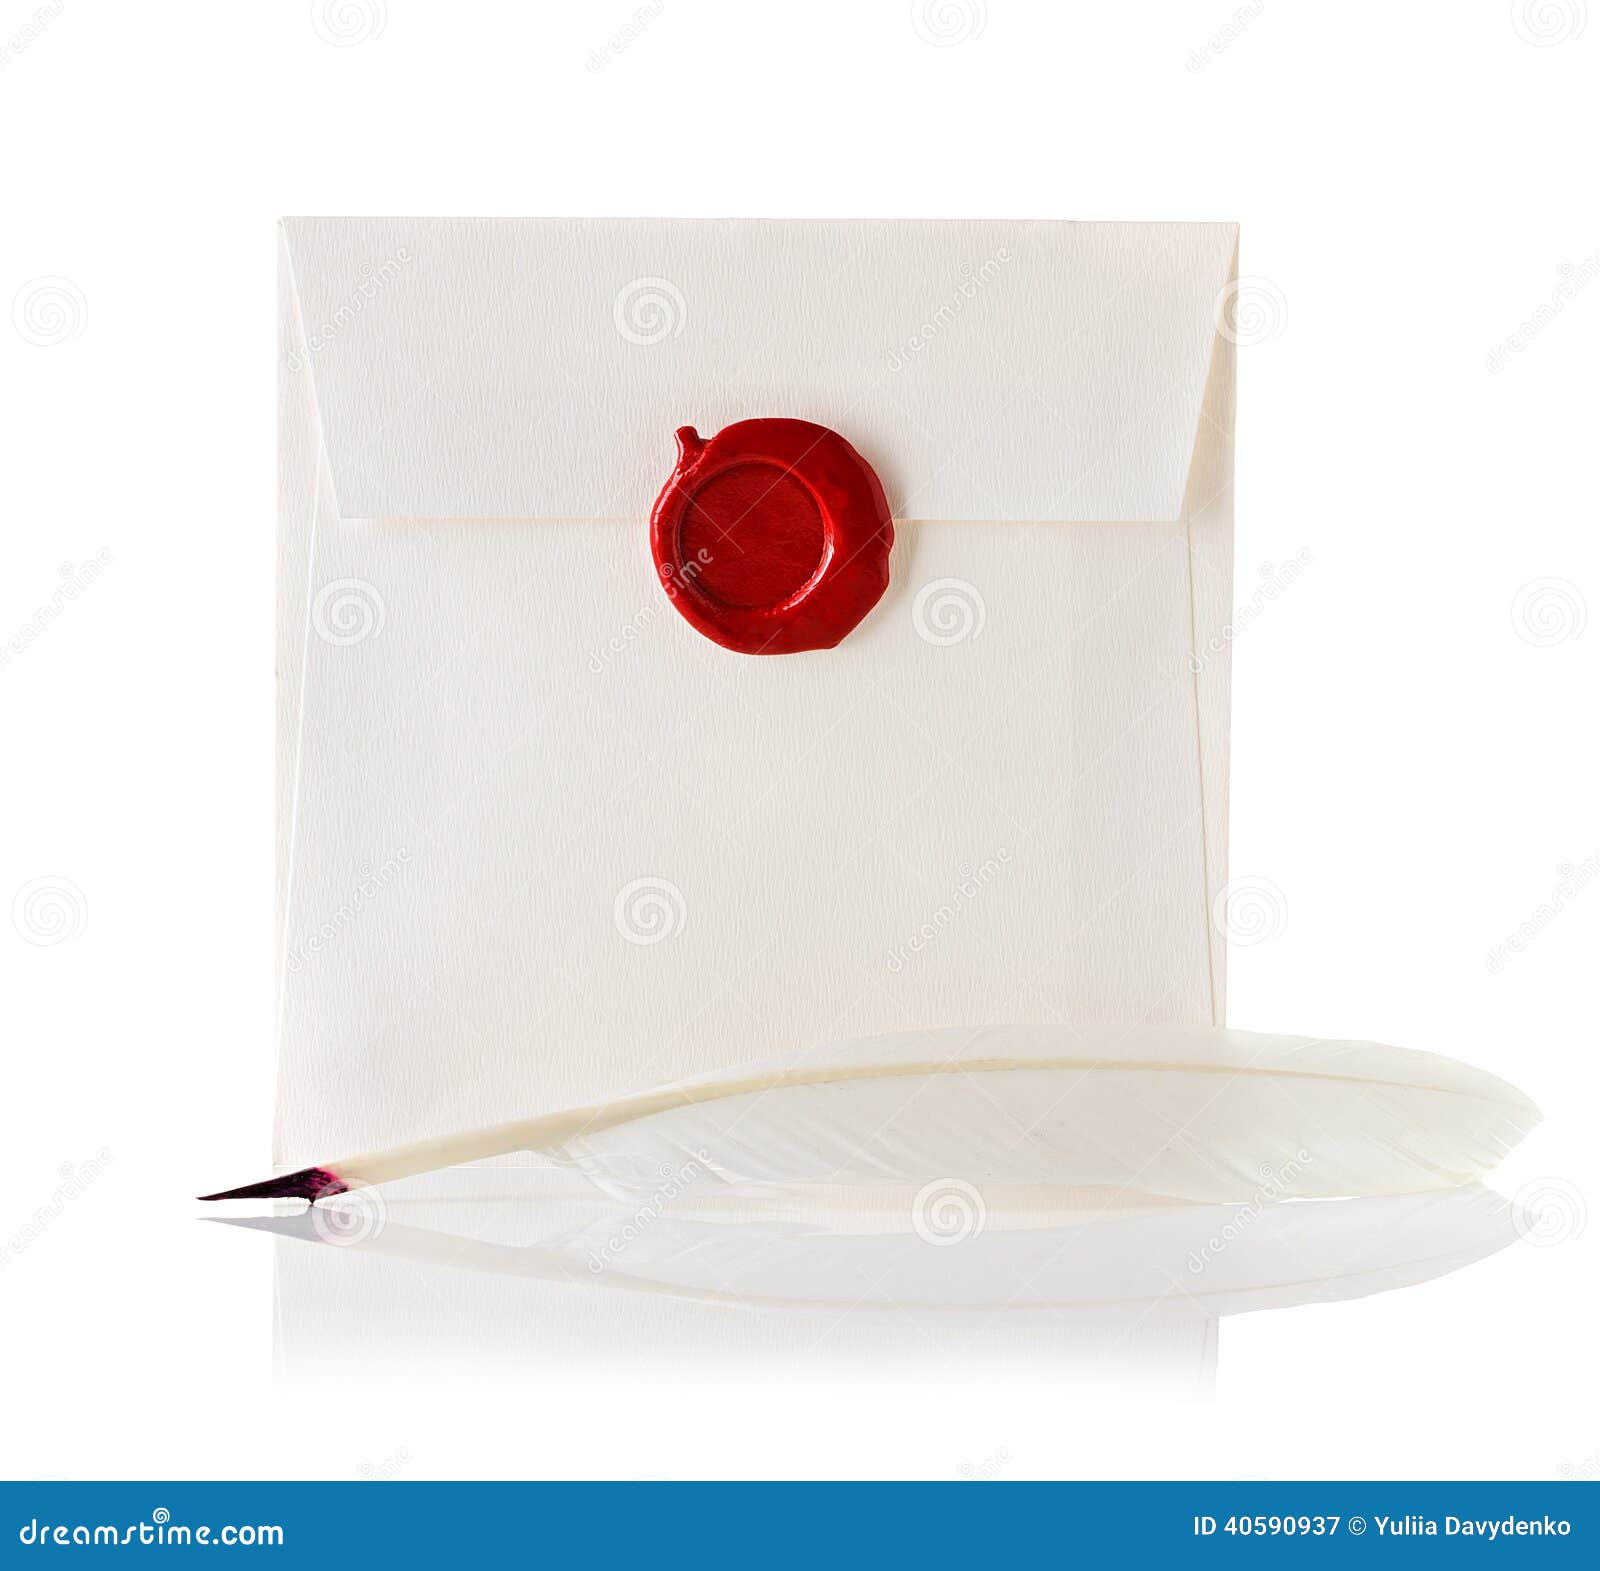 Mail Envelope Or Letter Sealed With Wax Seal Stamp And ...